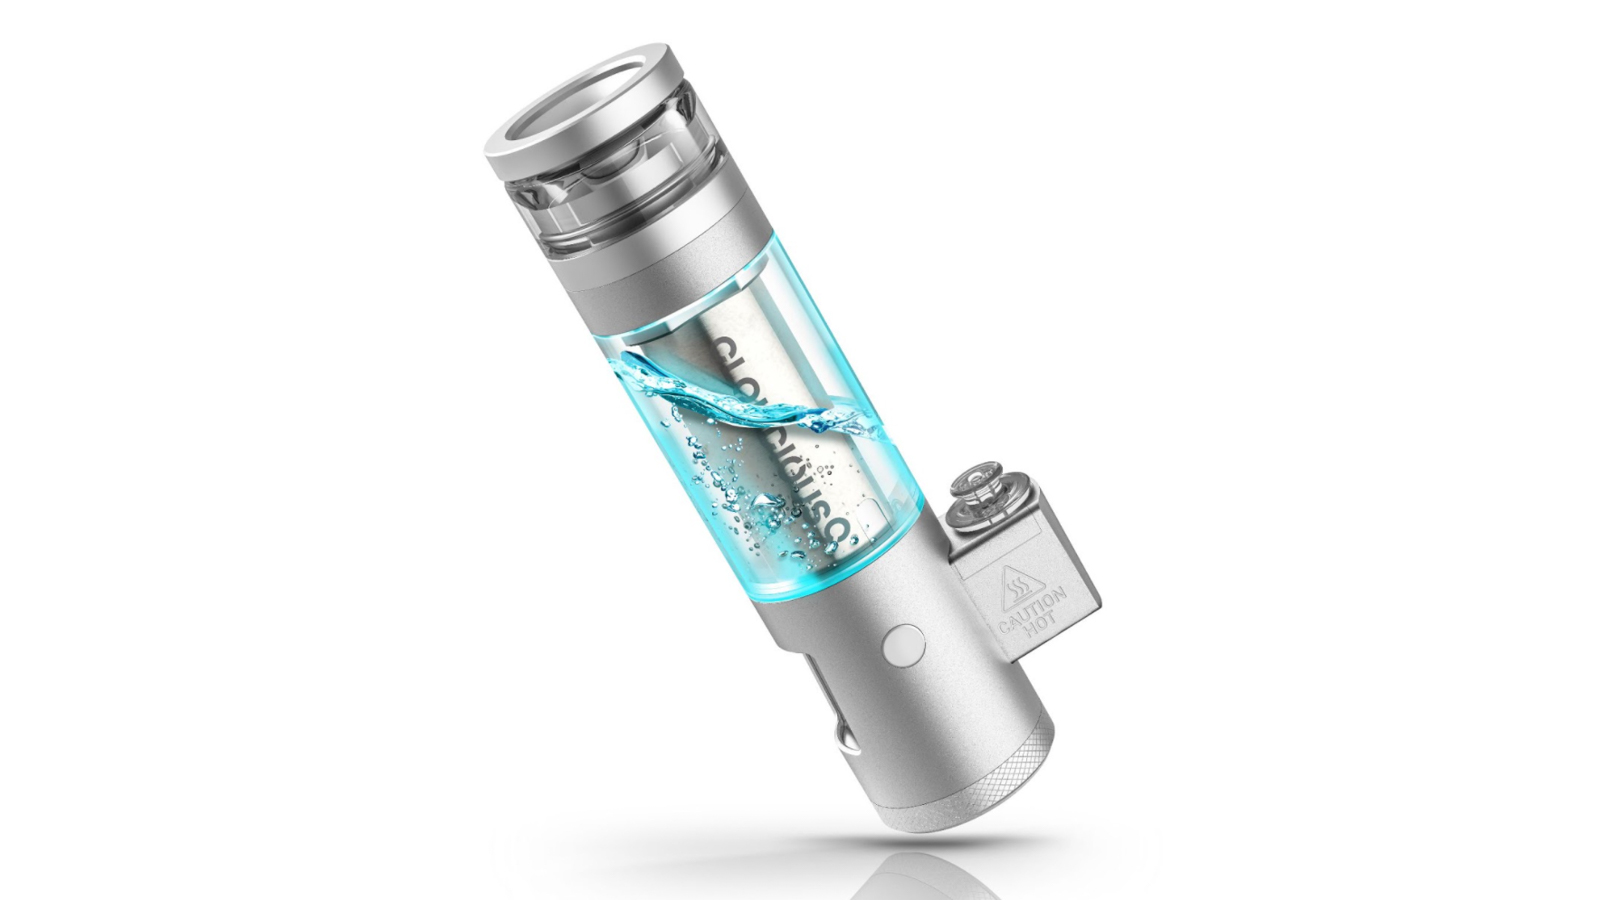 everything-you-need-to-know-about-the-hydrology9-nx-vaporizer